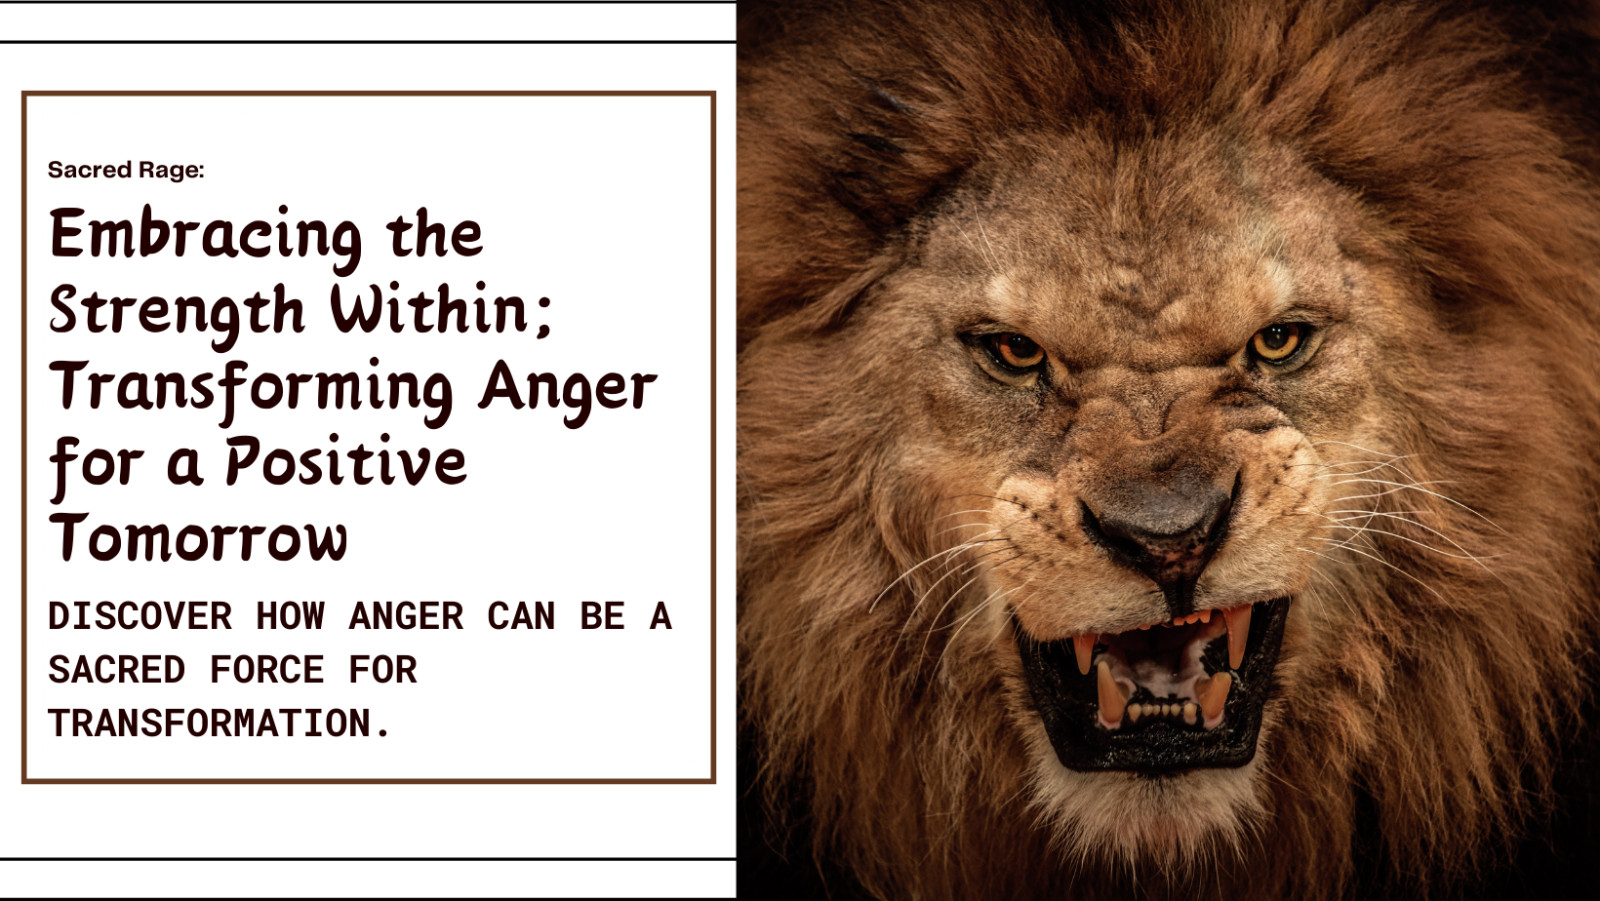 Embracing the Strength Within: Transforming Anger for a Positive Tomorrow